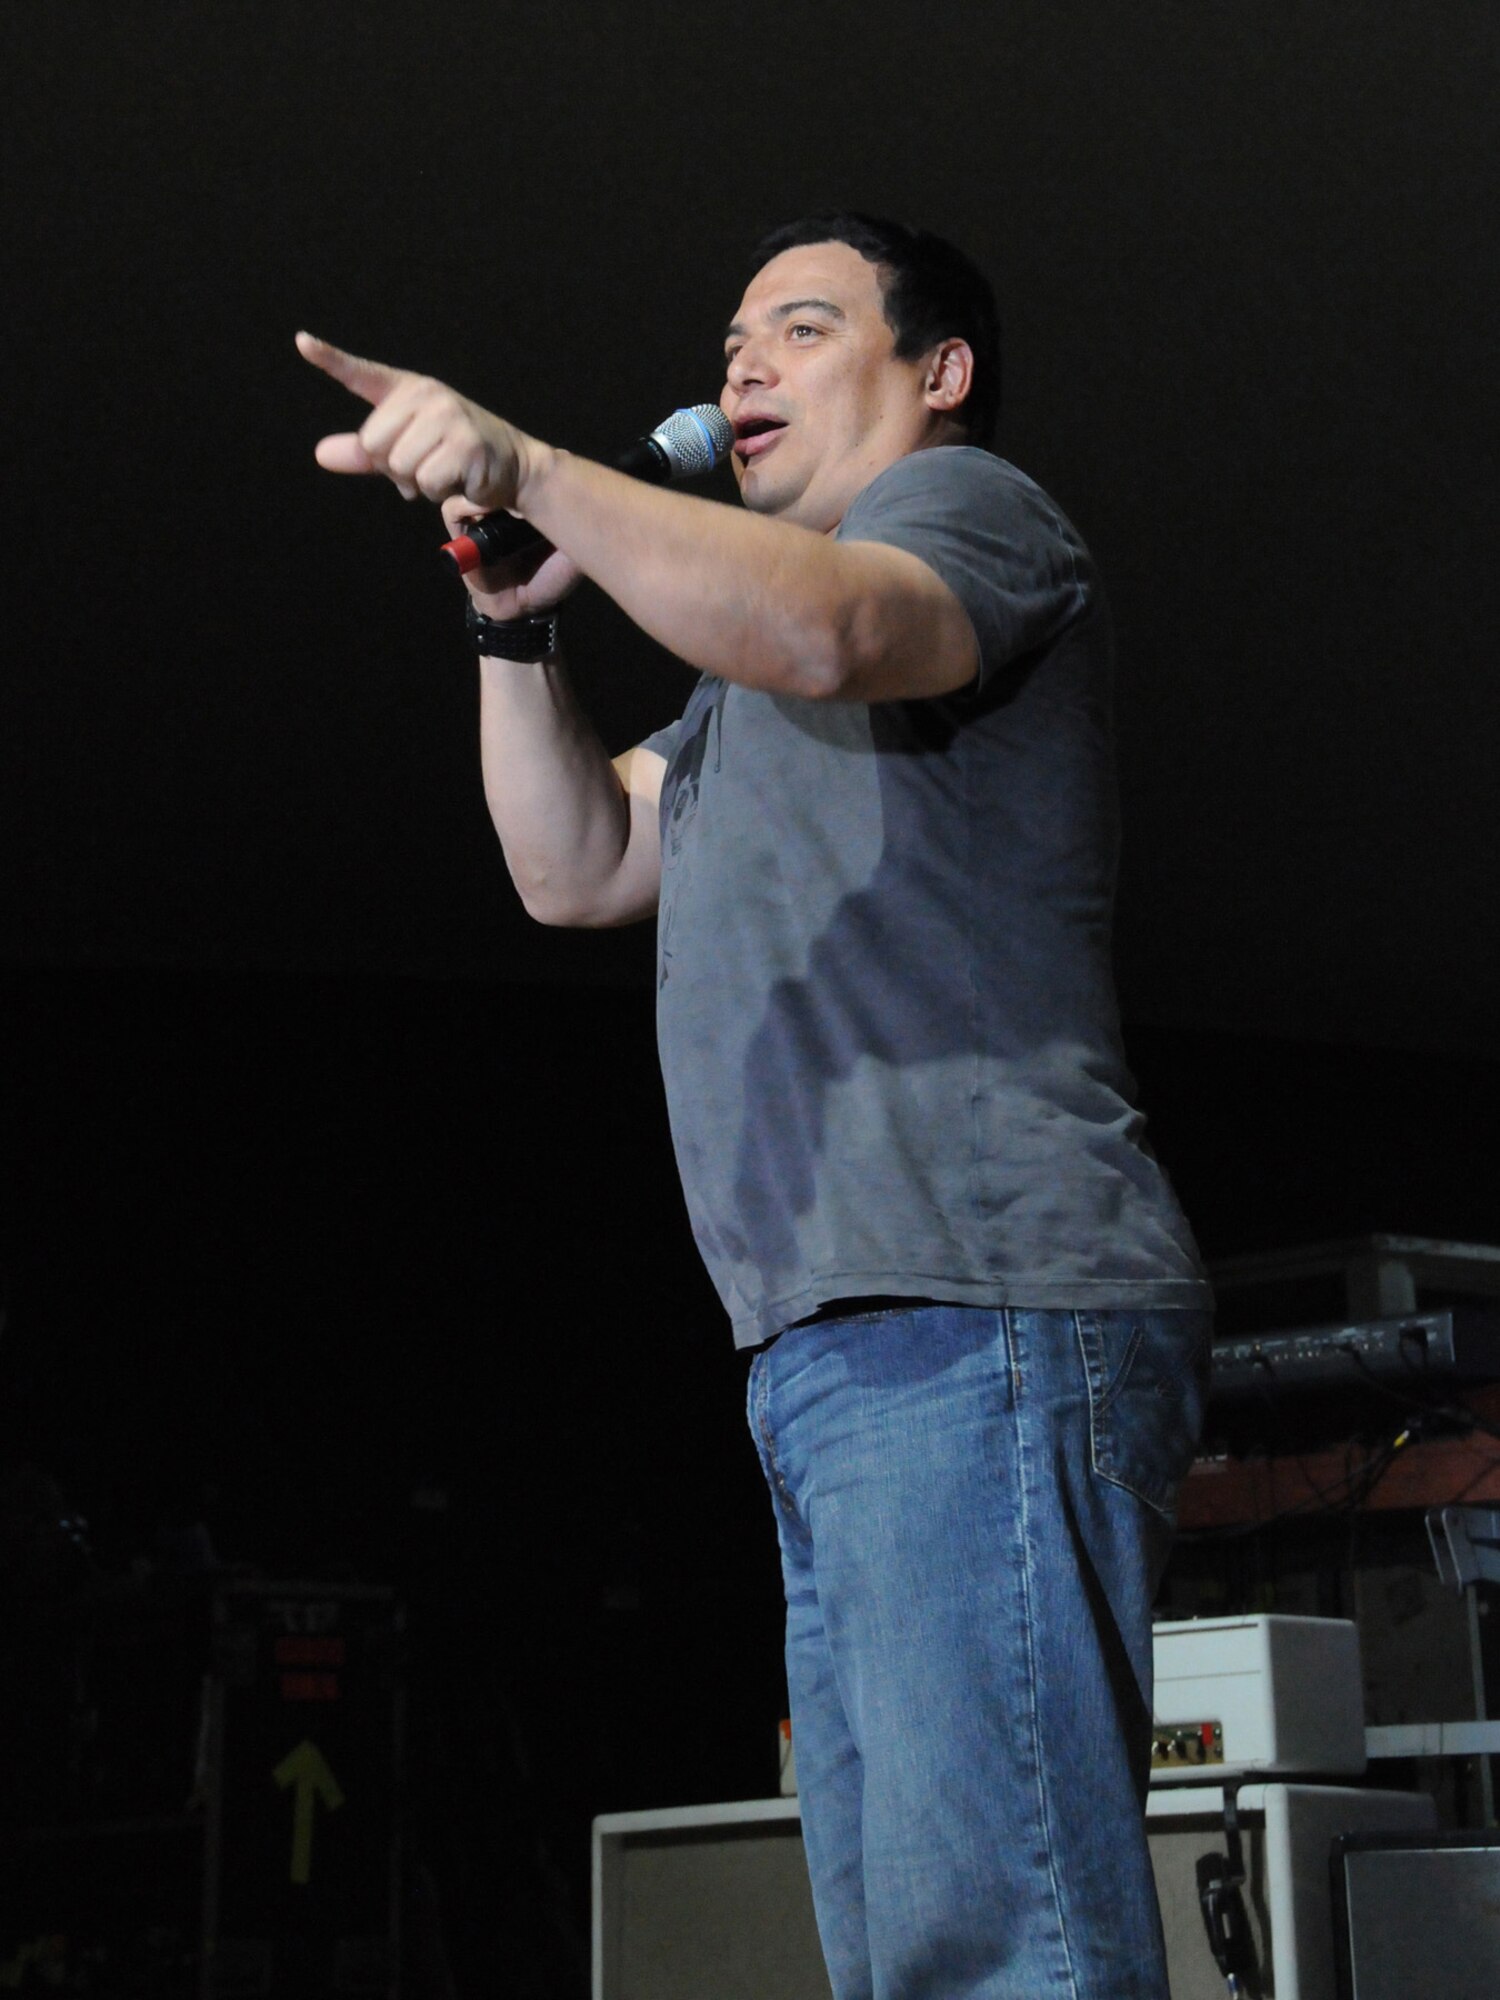 Carlos Mencia performs for a live audience of deployed servicemembers in Southwest Asia, Dec. 6, 2009. Tour for Troops 2009 will visit various deployed locations throughout Southwest Asia and Europe and is sponsored by the U.S. Air Force Reserve Command. (U.S. Air Force Photo/Tech Sgt. Jason W. Edwards)